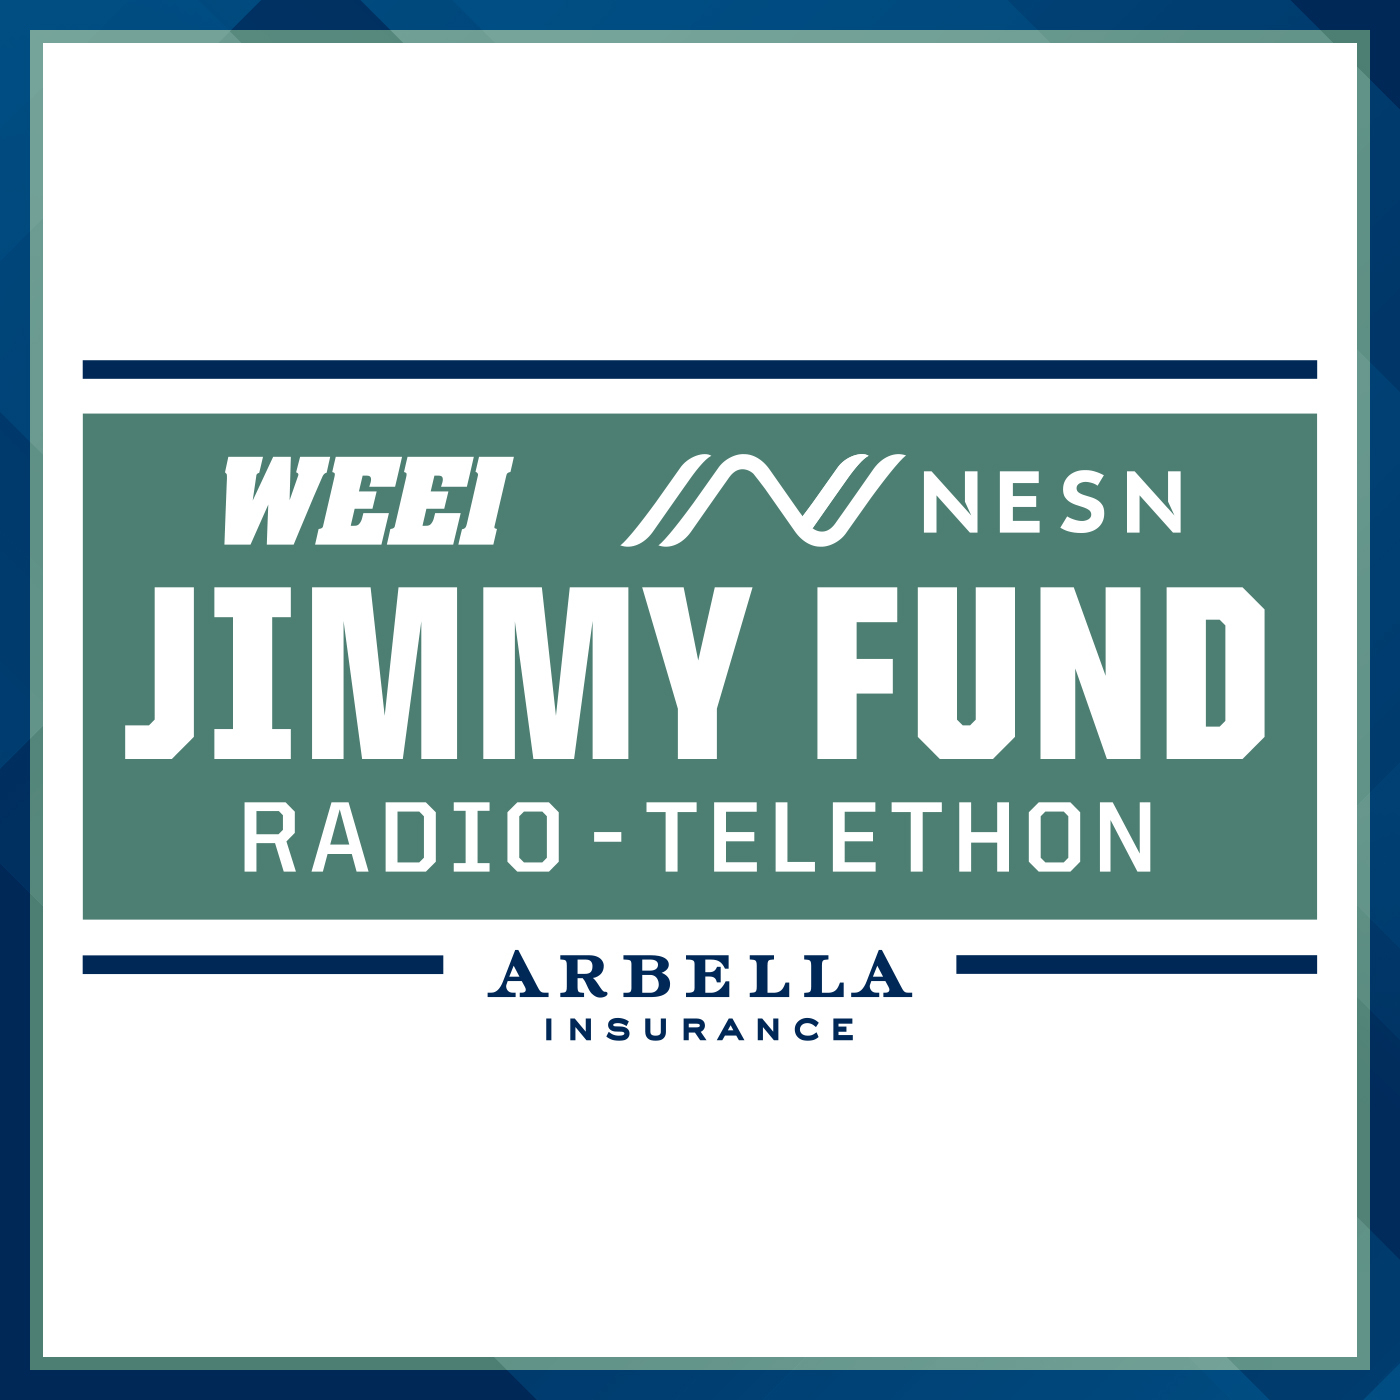 Laurie H. Glimcher, MD, president and CEO, Dana-Farber Cancer Institute discusses the involvement of Boston athletes in the Jimmy Fund and the research the Jimmy Fund funds